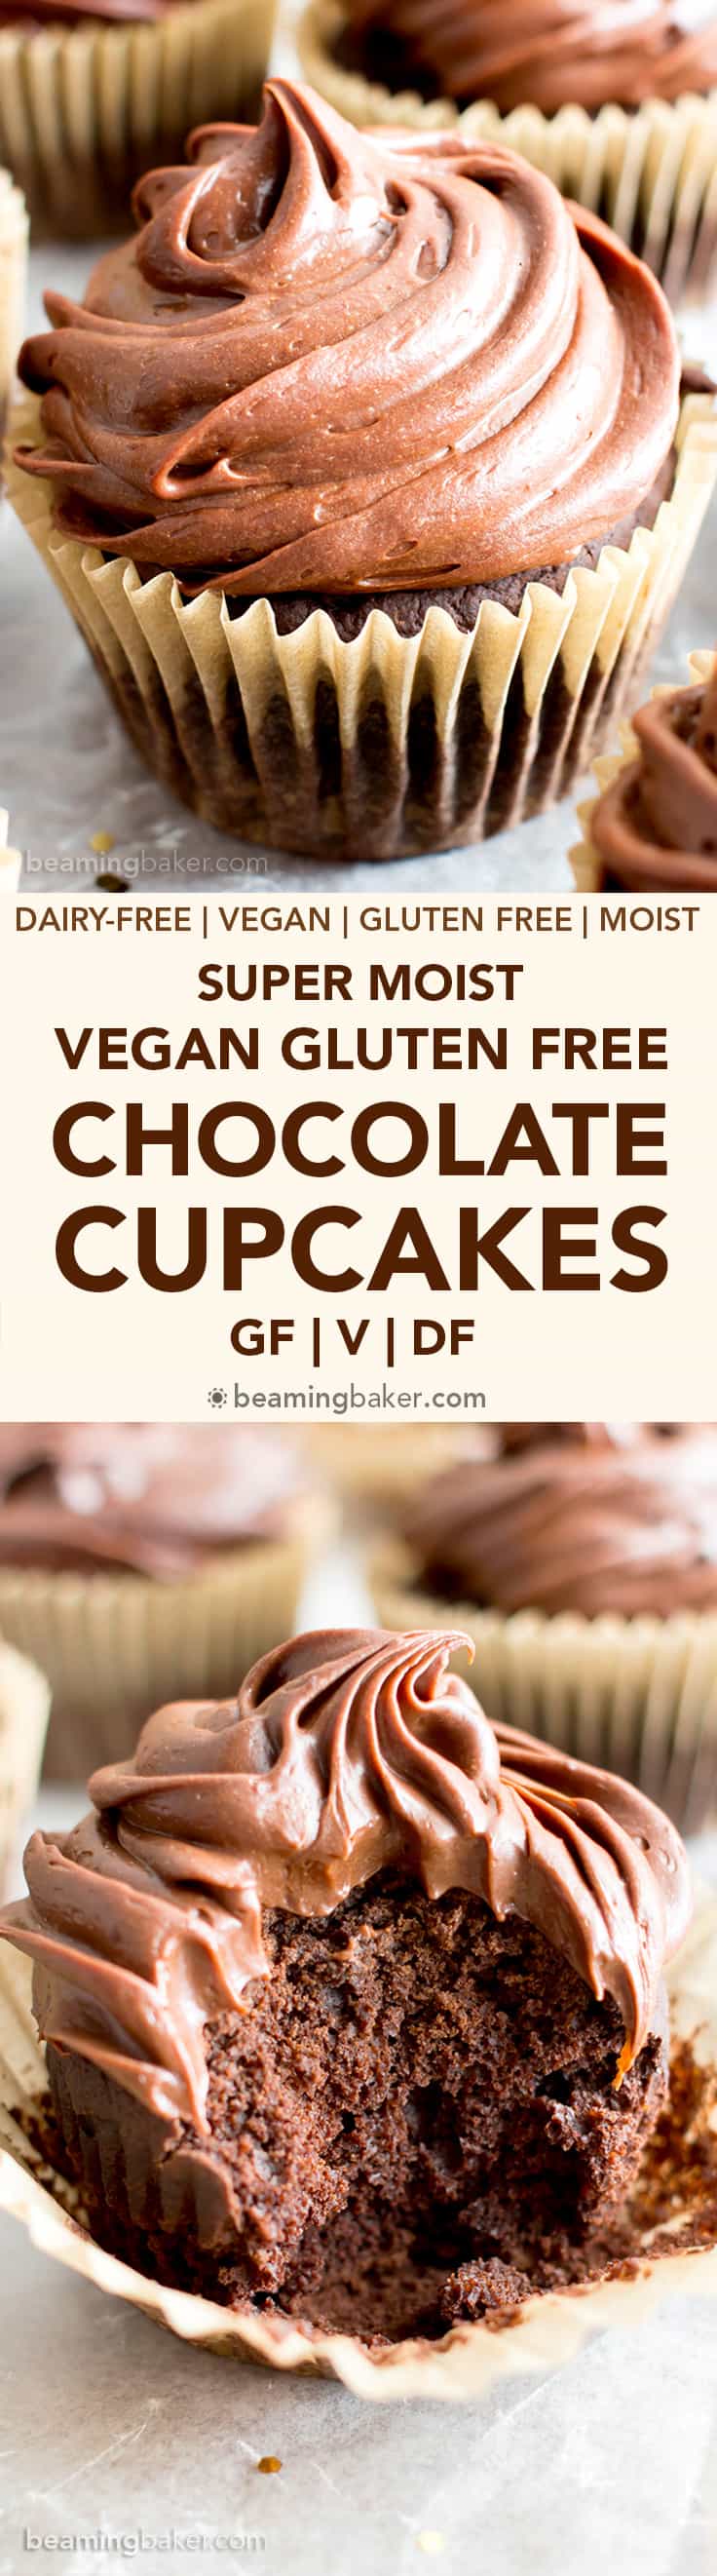 Vegan Gluten Free Chocolate Cupcakes (V, GF): an easy recipe for deliciously moist chocolate cupcakes topped with silky smooth chocolate frosting. #Vegan #GlutenFree #DairyFree #Dessert #Cupcakes | Recipe on BeamingBaker.com